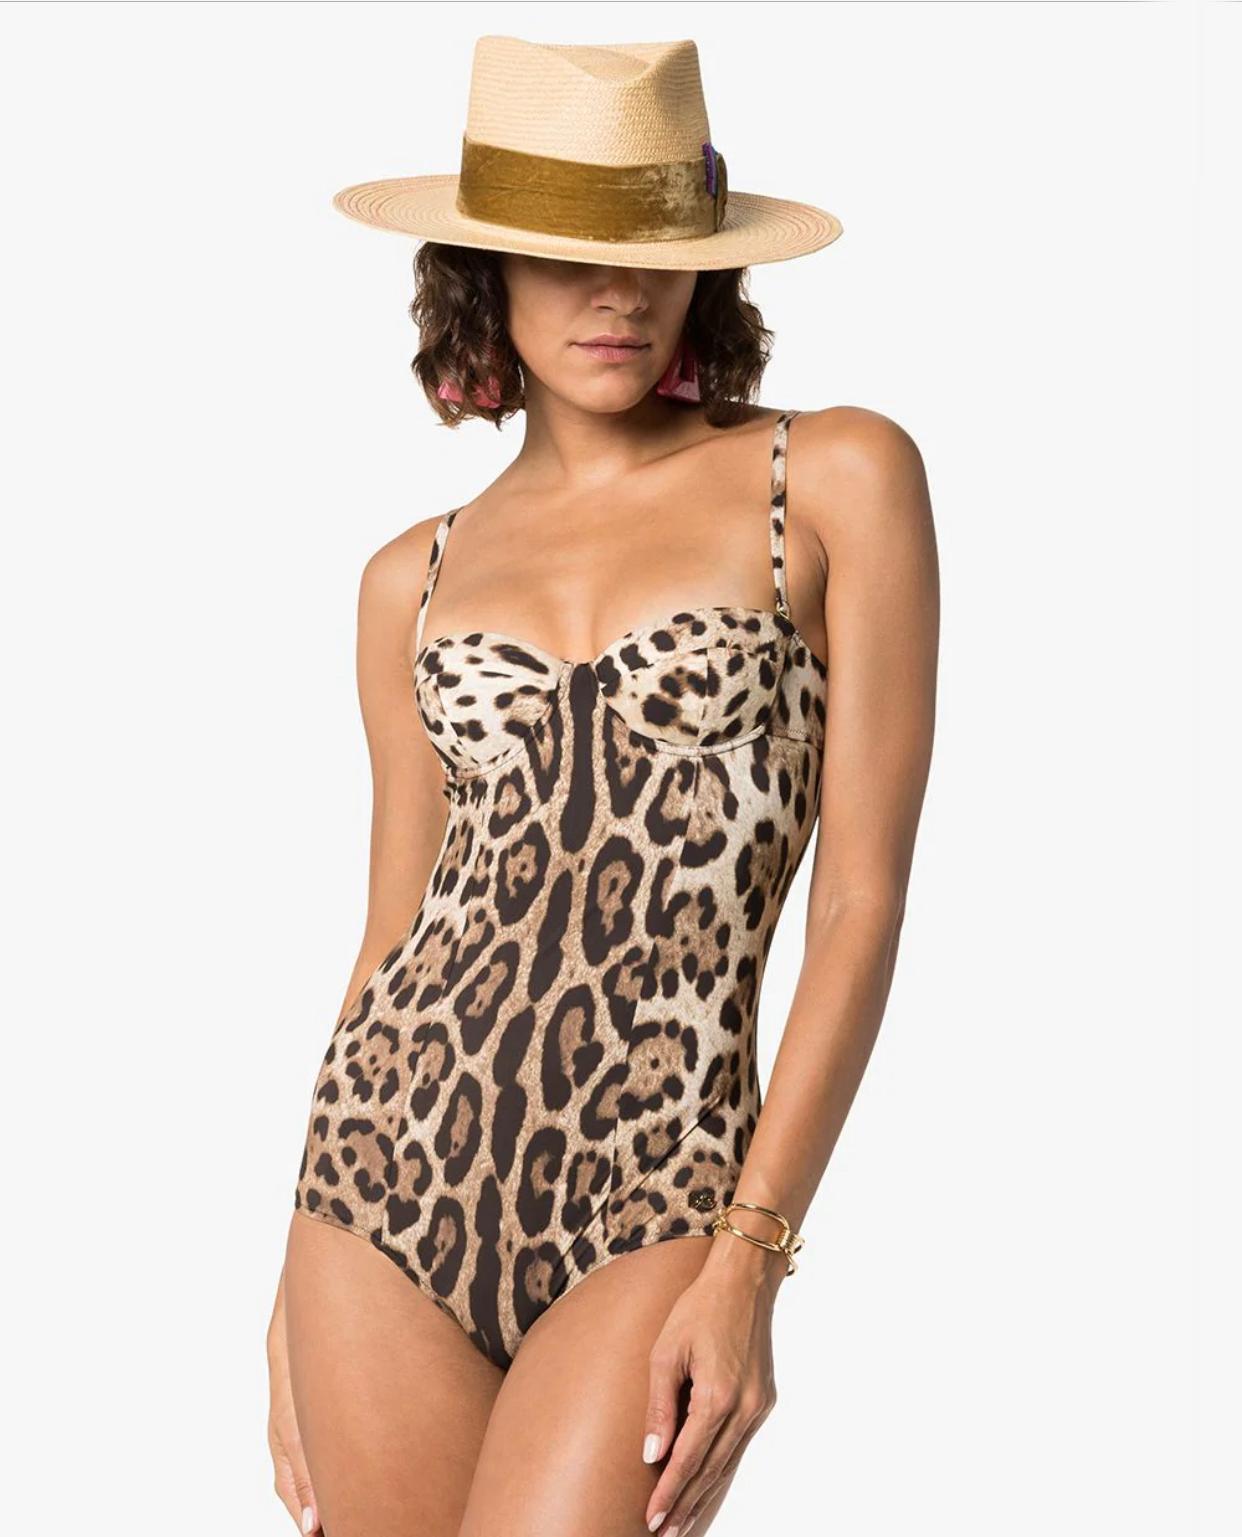 Dolce & Gabbana romantic full swimsuit with a built-in balcony bra made from precious fabric in the LEOPARD print has an extraordinarily sensual look. Perfect for both the poolside and as a top for a cocktail party:
Underwired bra with padded